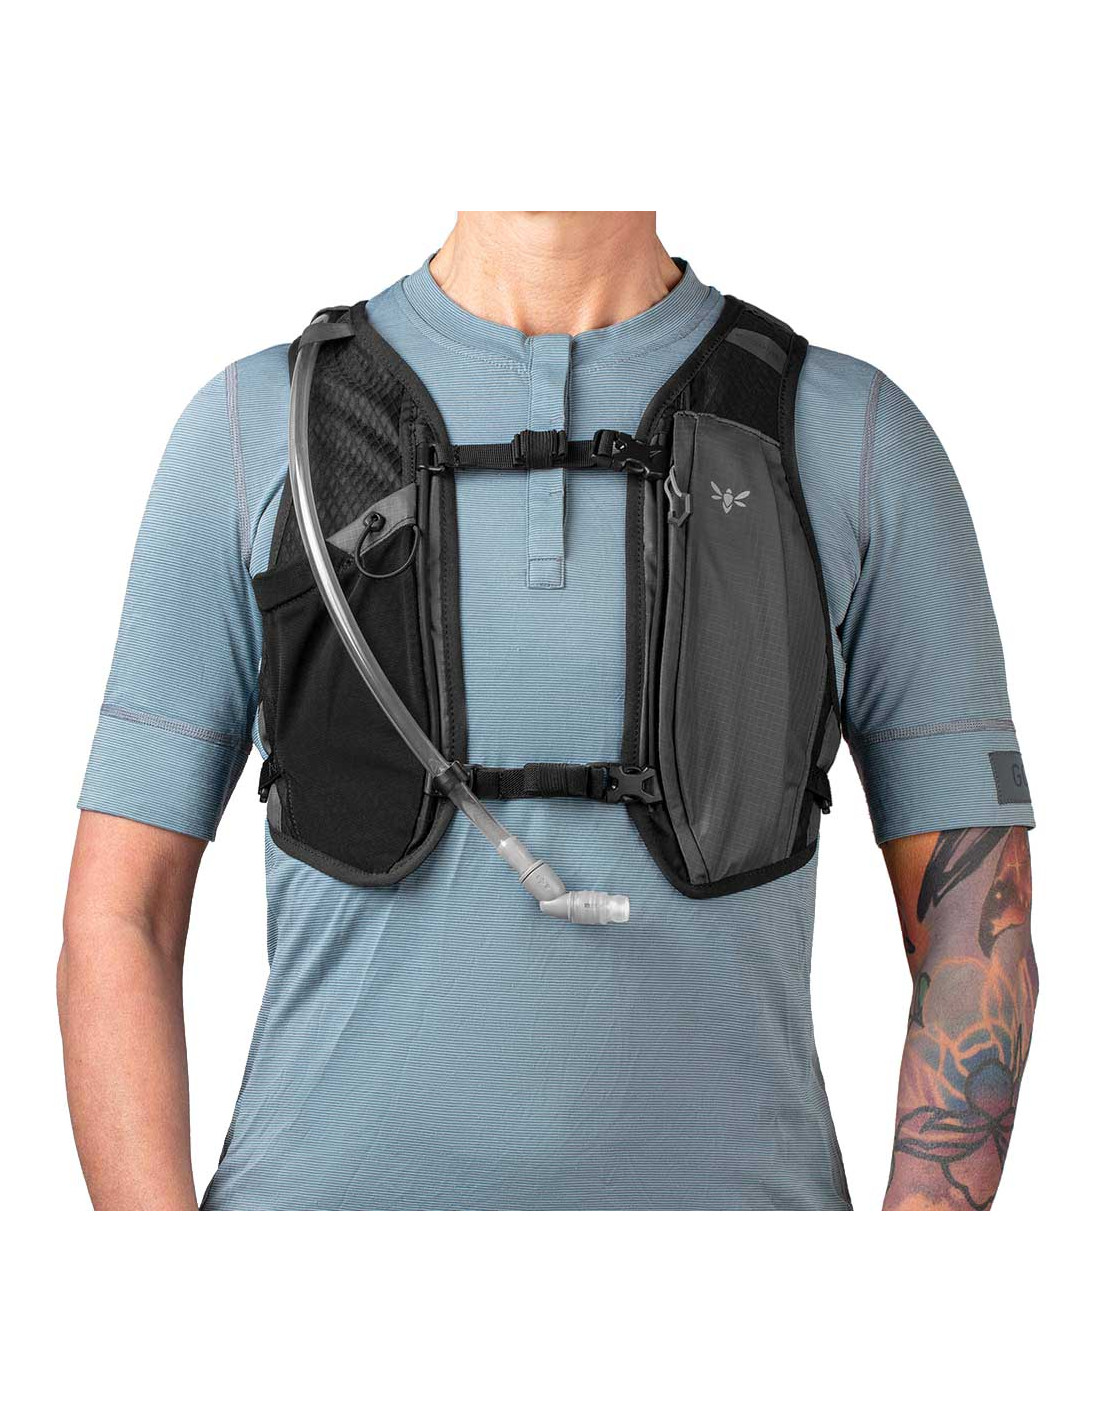 BACKCOUNTRY HYDRATION BACKPACK